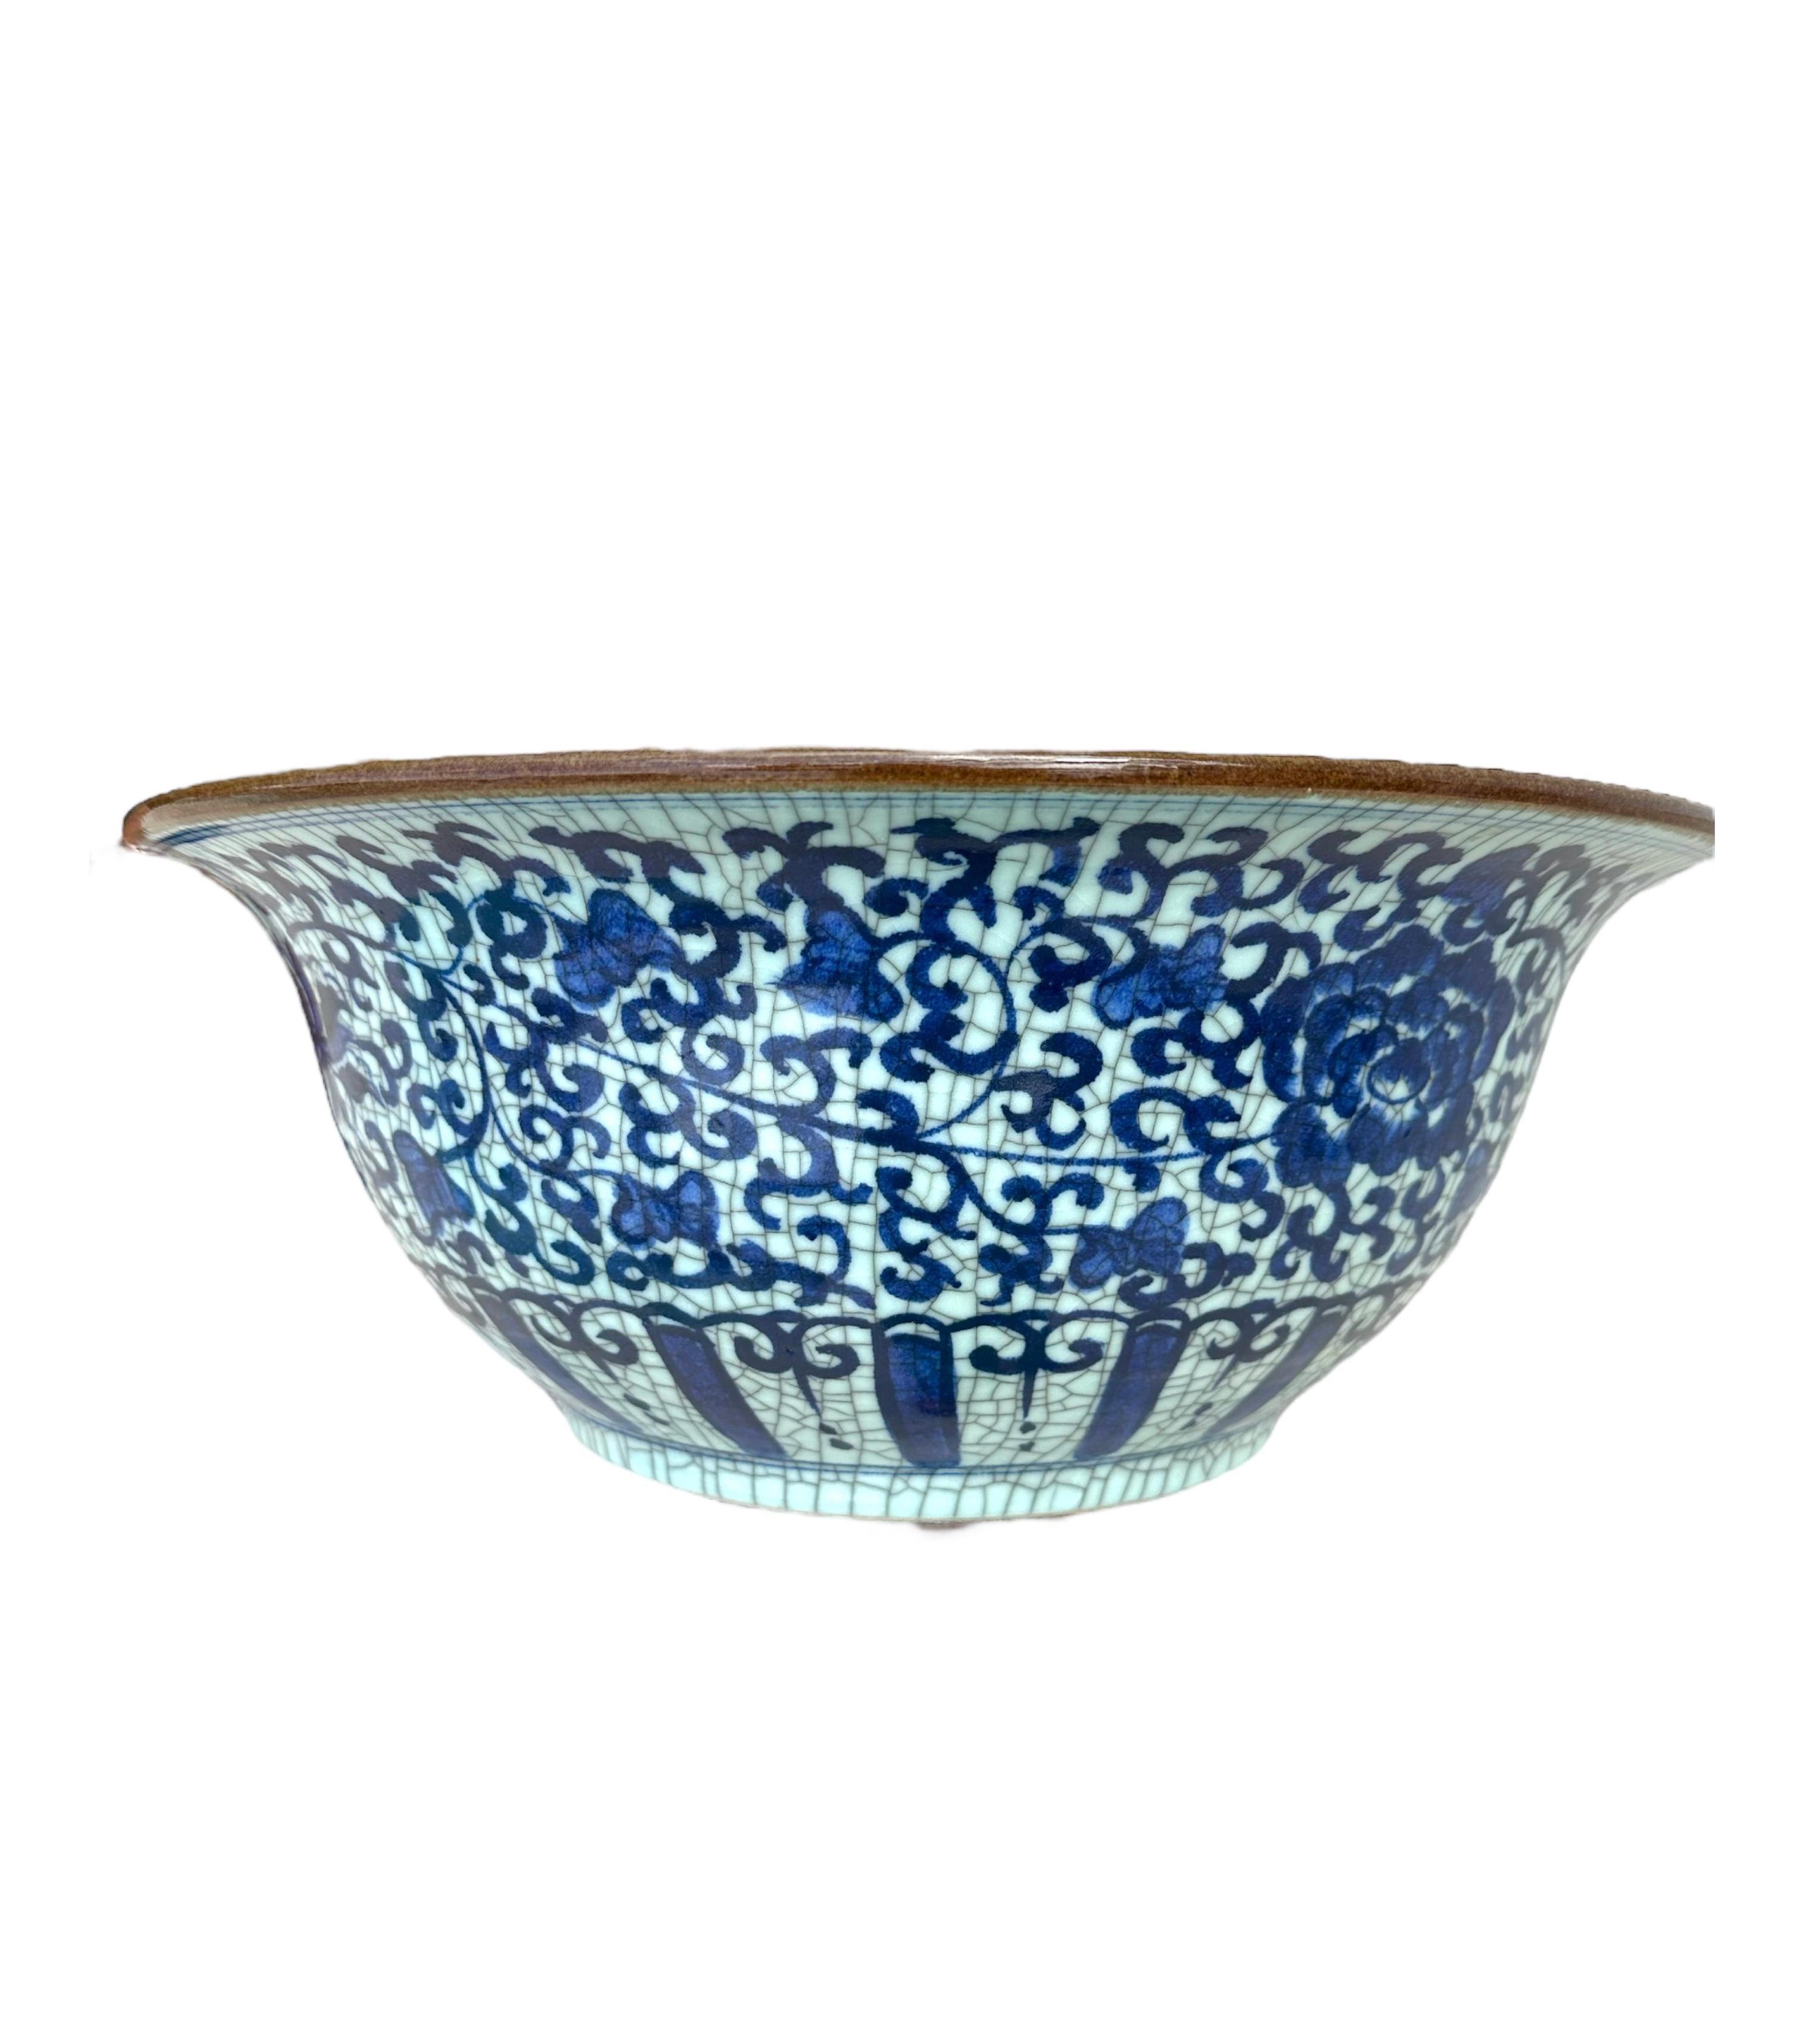 This is an absolutely stunning blue and white Bowl- I’m not sure what dynasty this is that I did a lot of research it is believed to be late 19th century. In person this is truly stunning!
The crackling is beautiful. BTW this weight almost 30